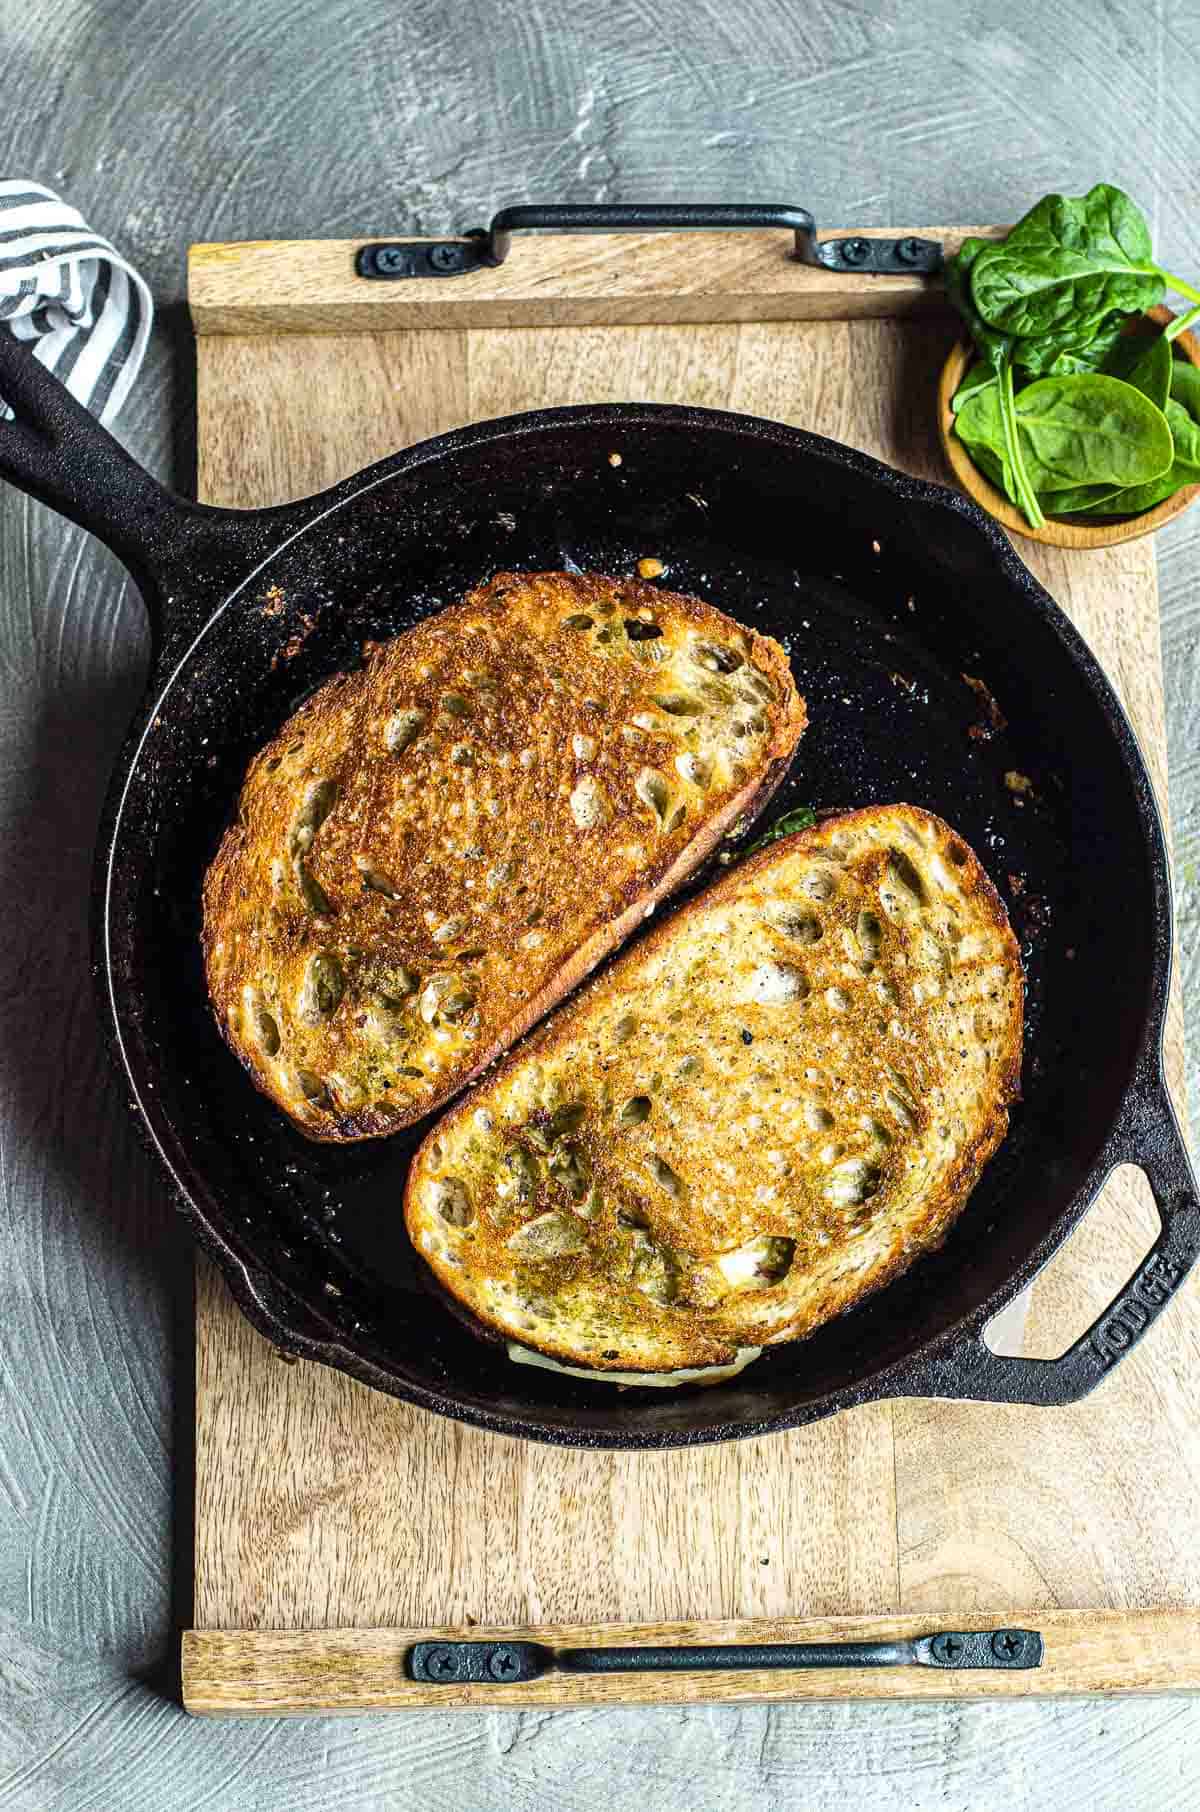 Two grilled cheese sandwiches in a cast iron pan